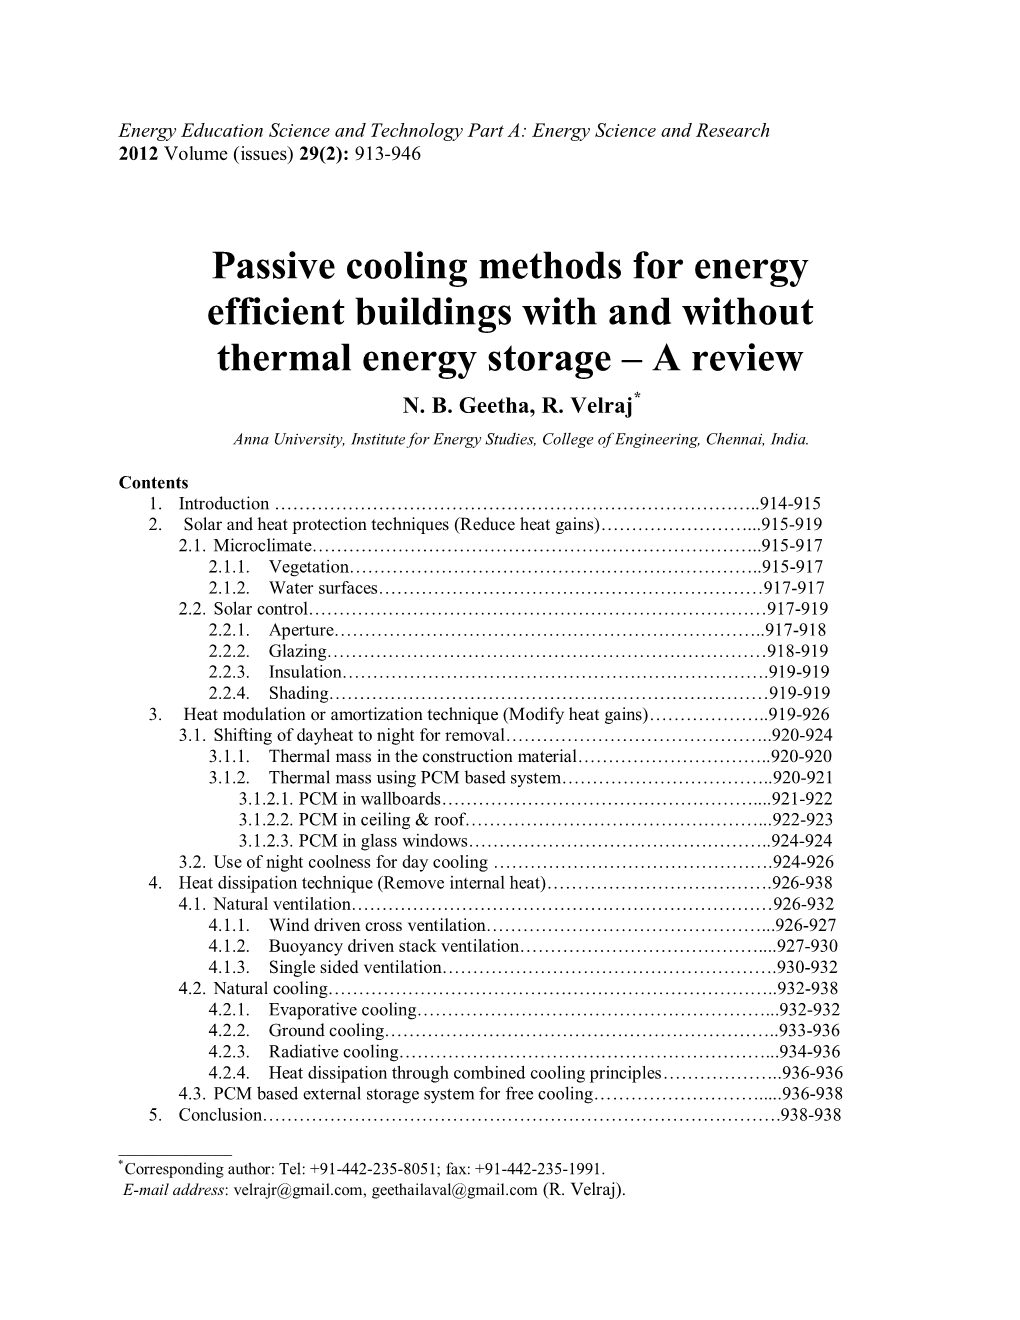 Passive Cooling Methods for Energy Efficient Buildings with and Without Thermal Energy Storage – a Review